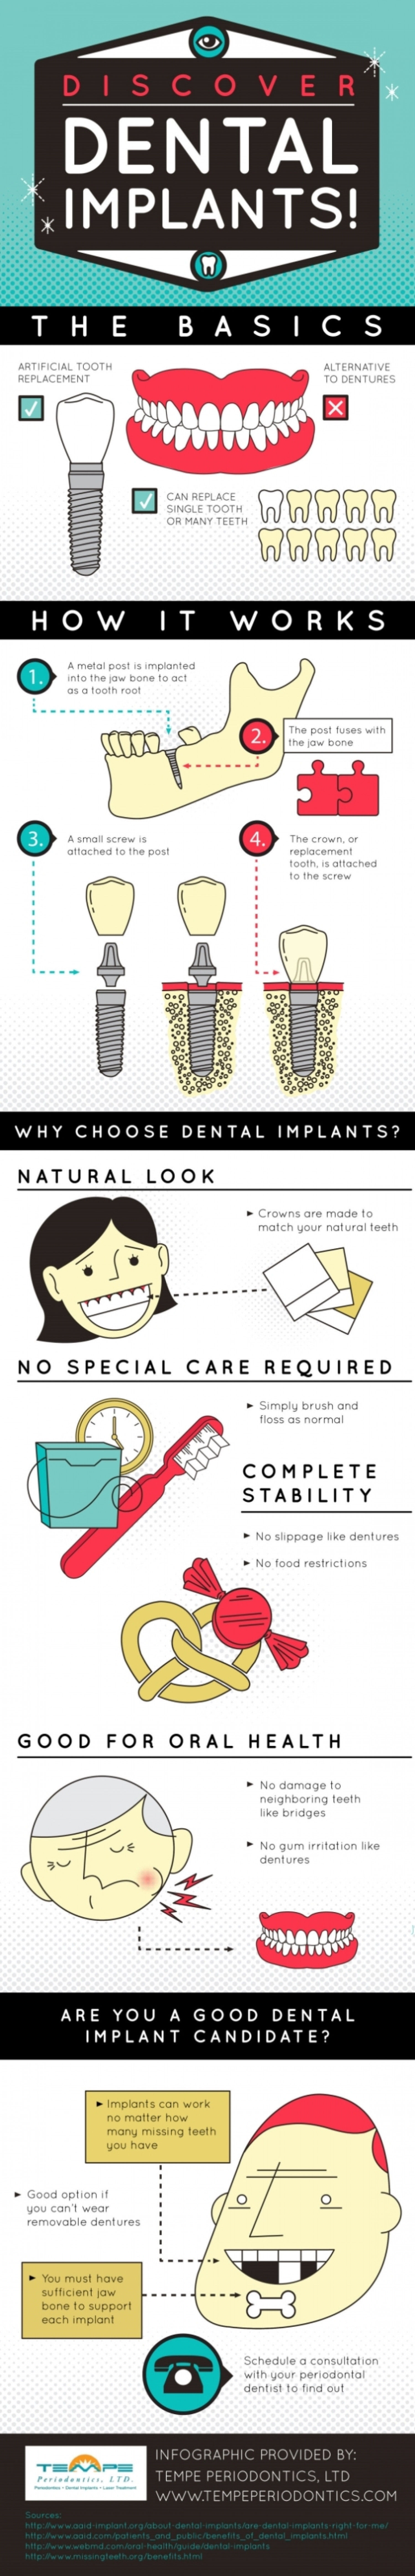 Discover Dental Implants! Infographic